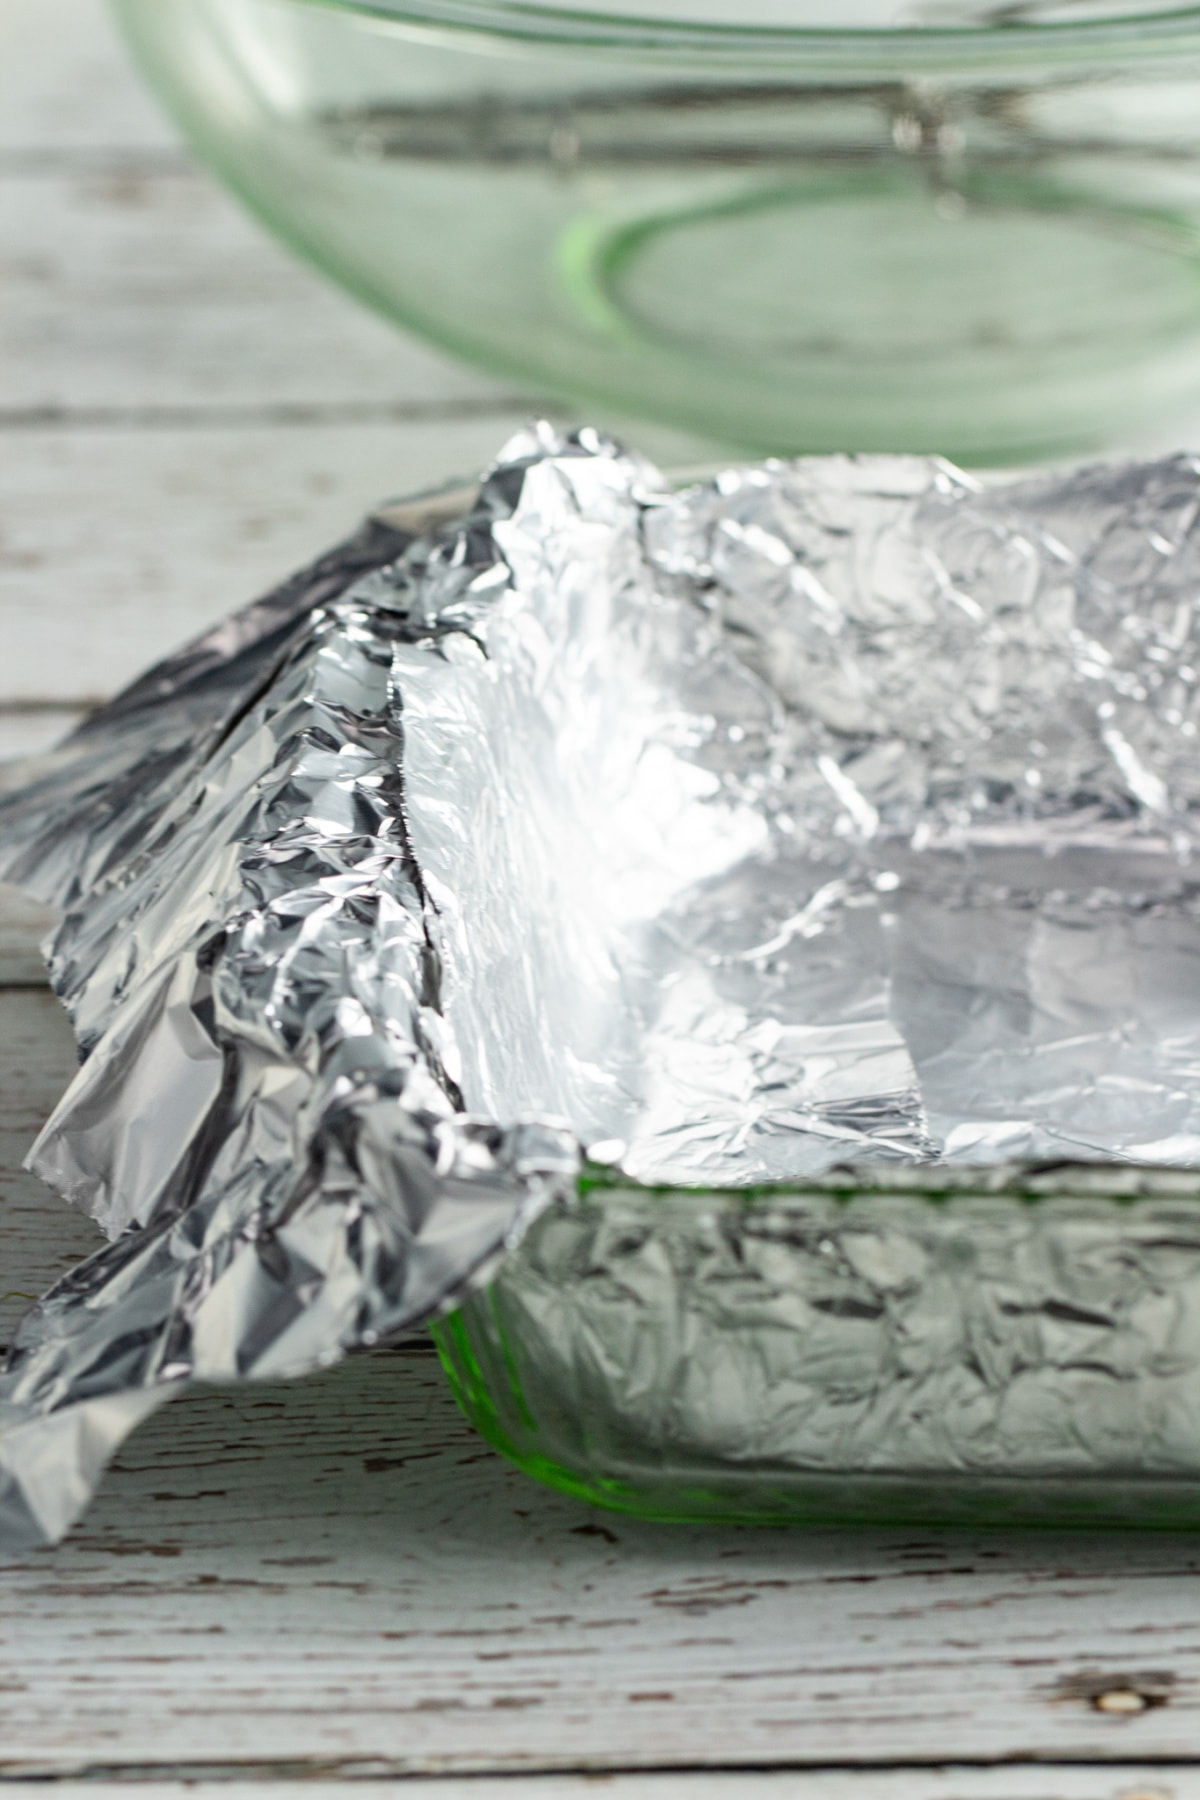 9-inch baking pan with foil